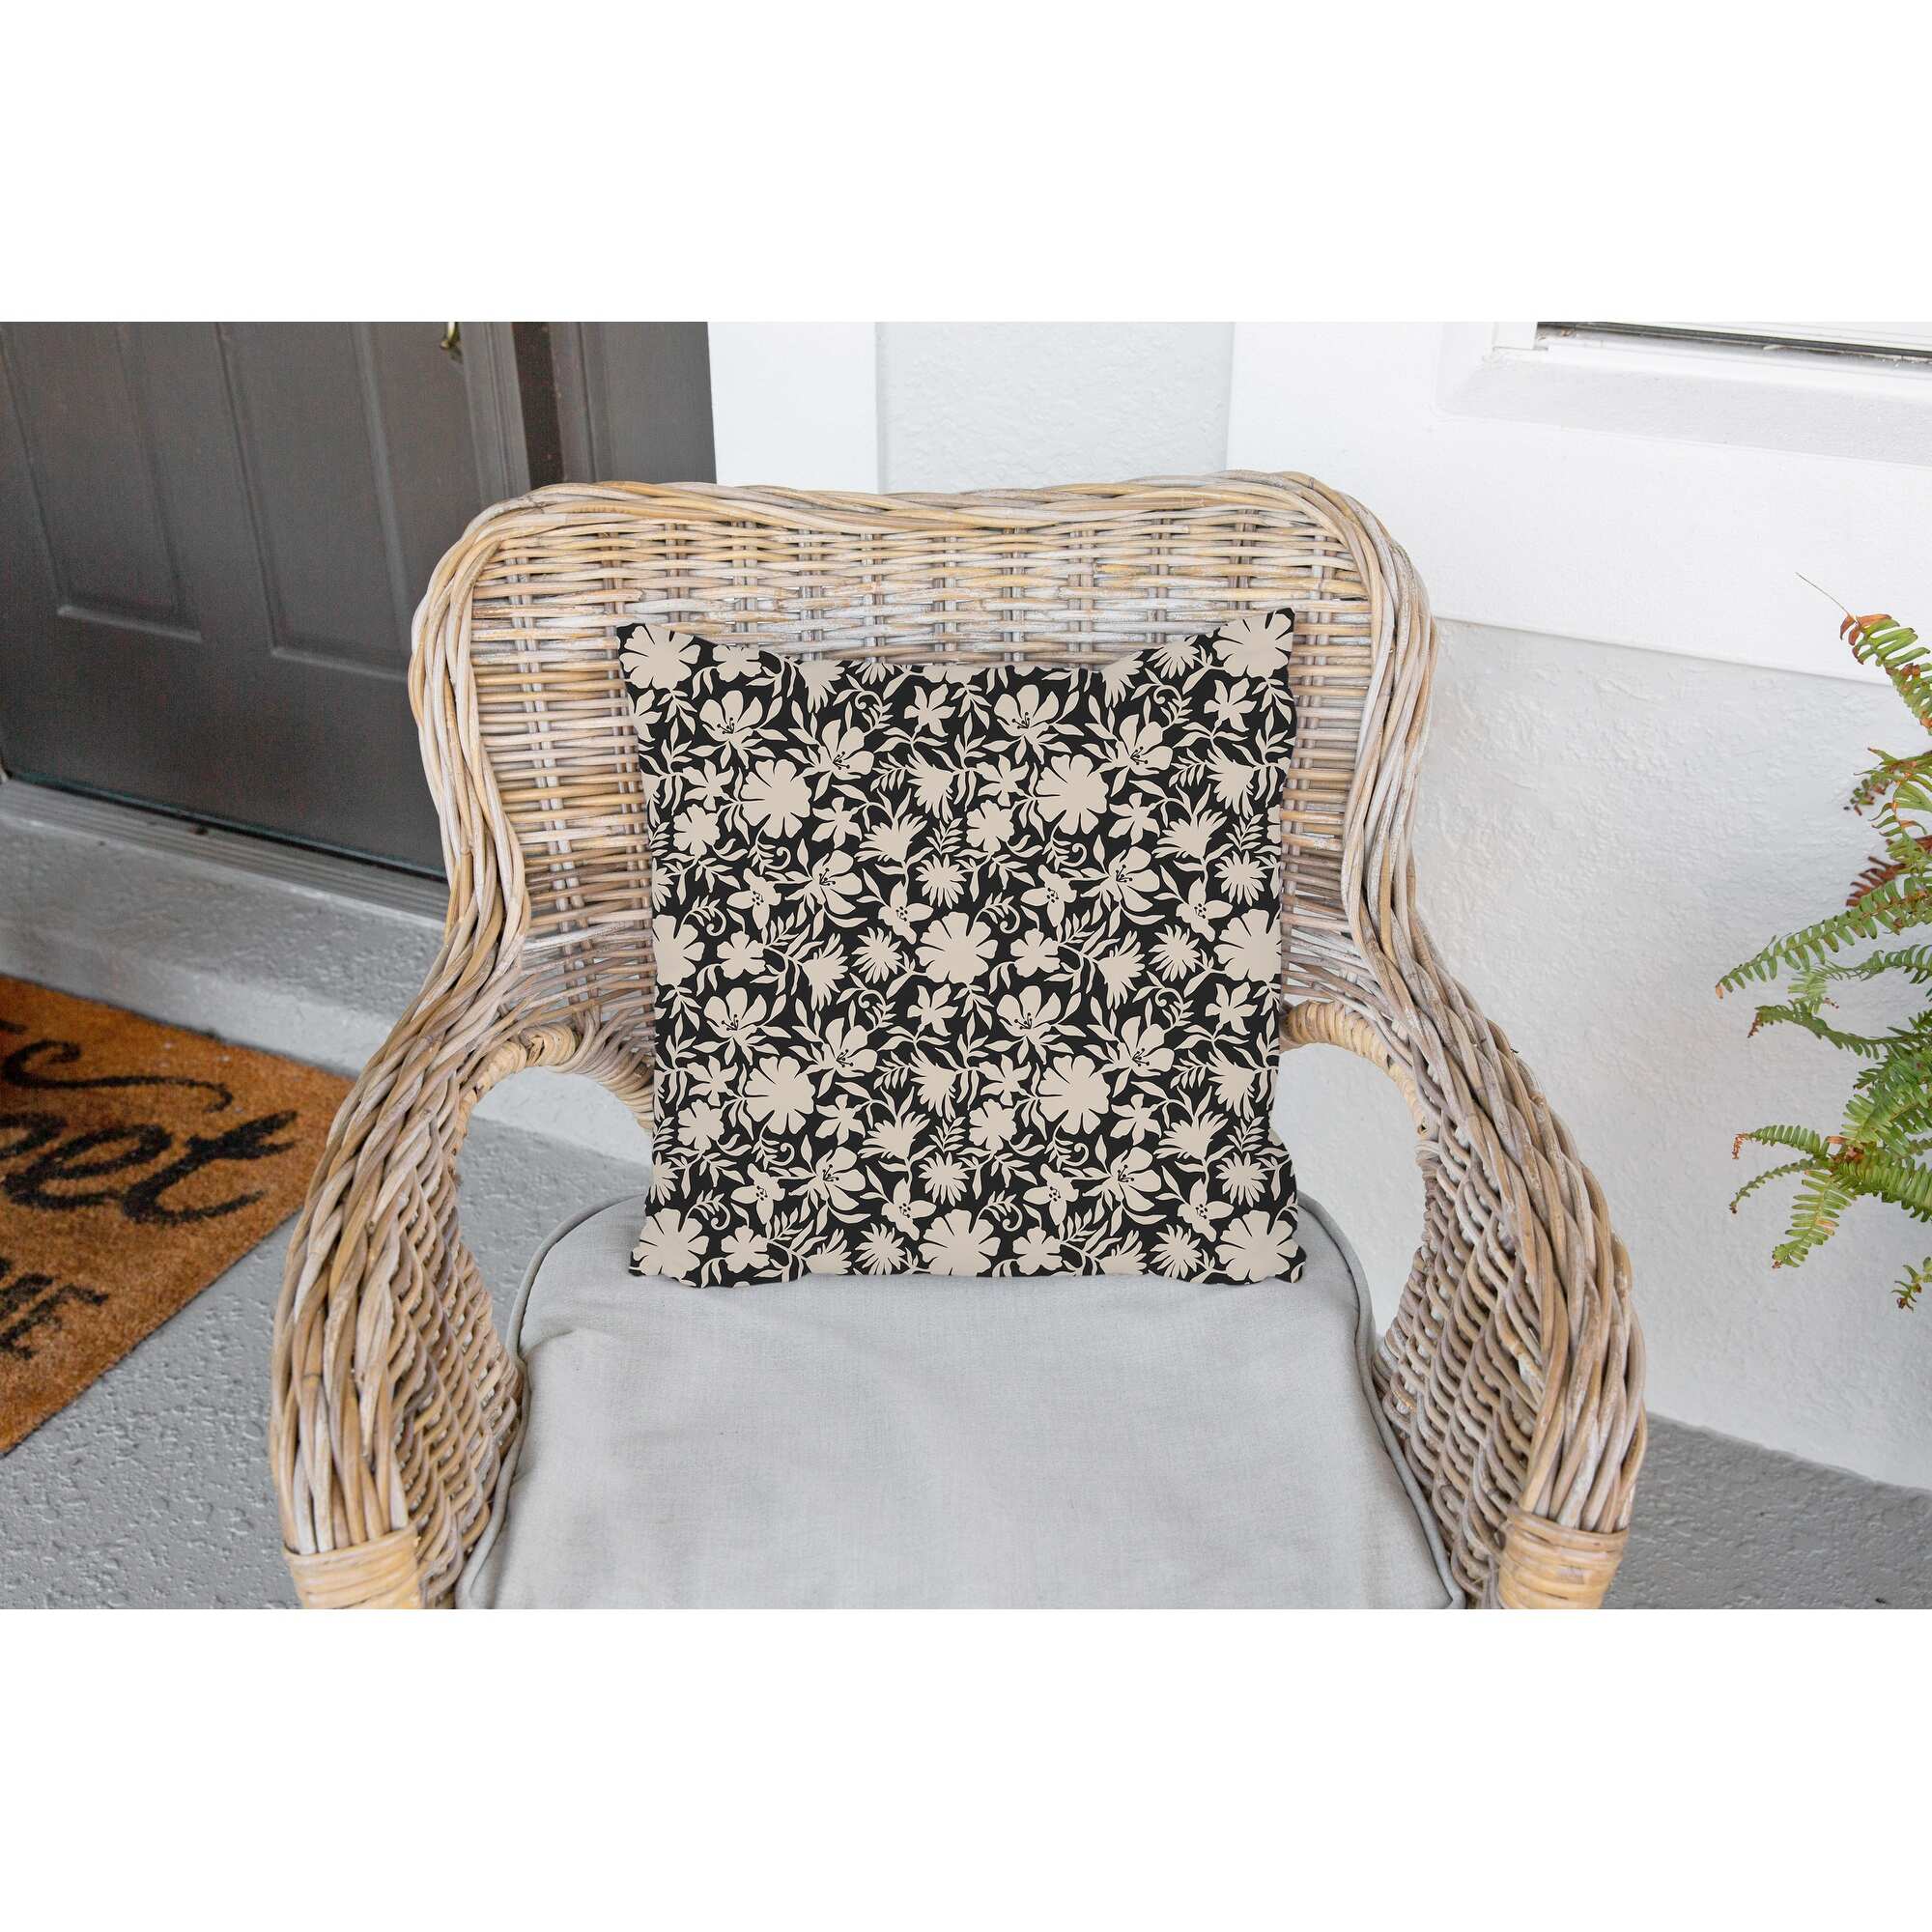 MINI FLORAL CHARCOAL Outdoor Pillow By Kavka Designs